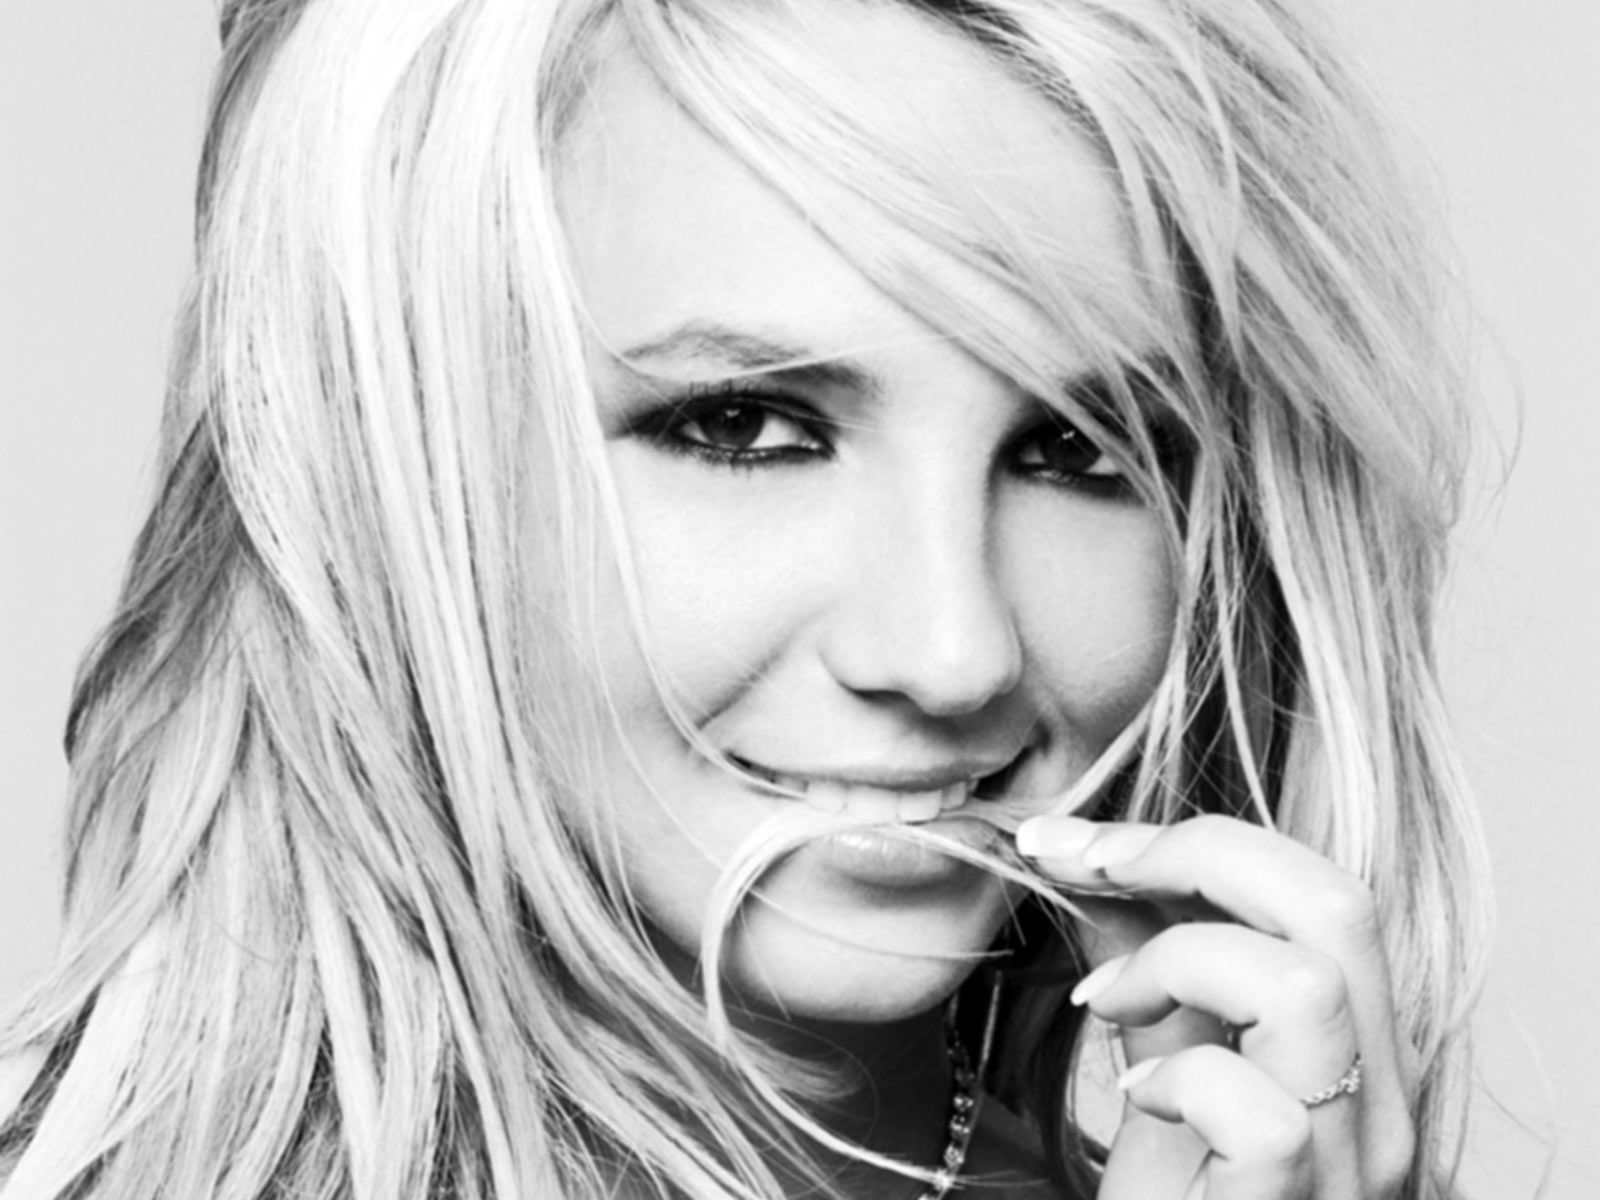 Britney Spears HD Wallpaper, Britney Spears Images, New Wallpapers